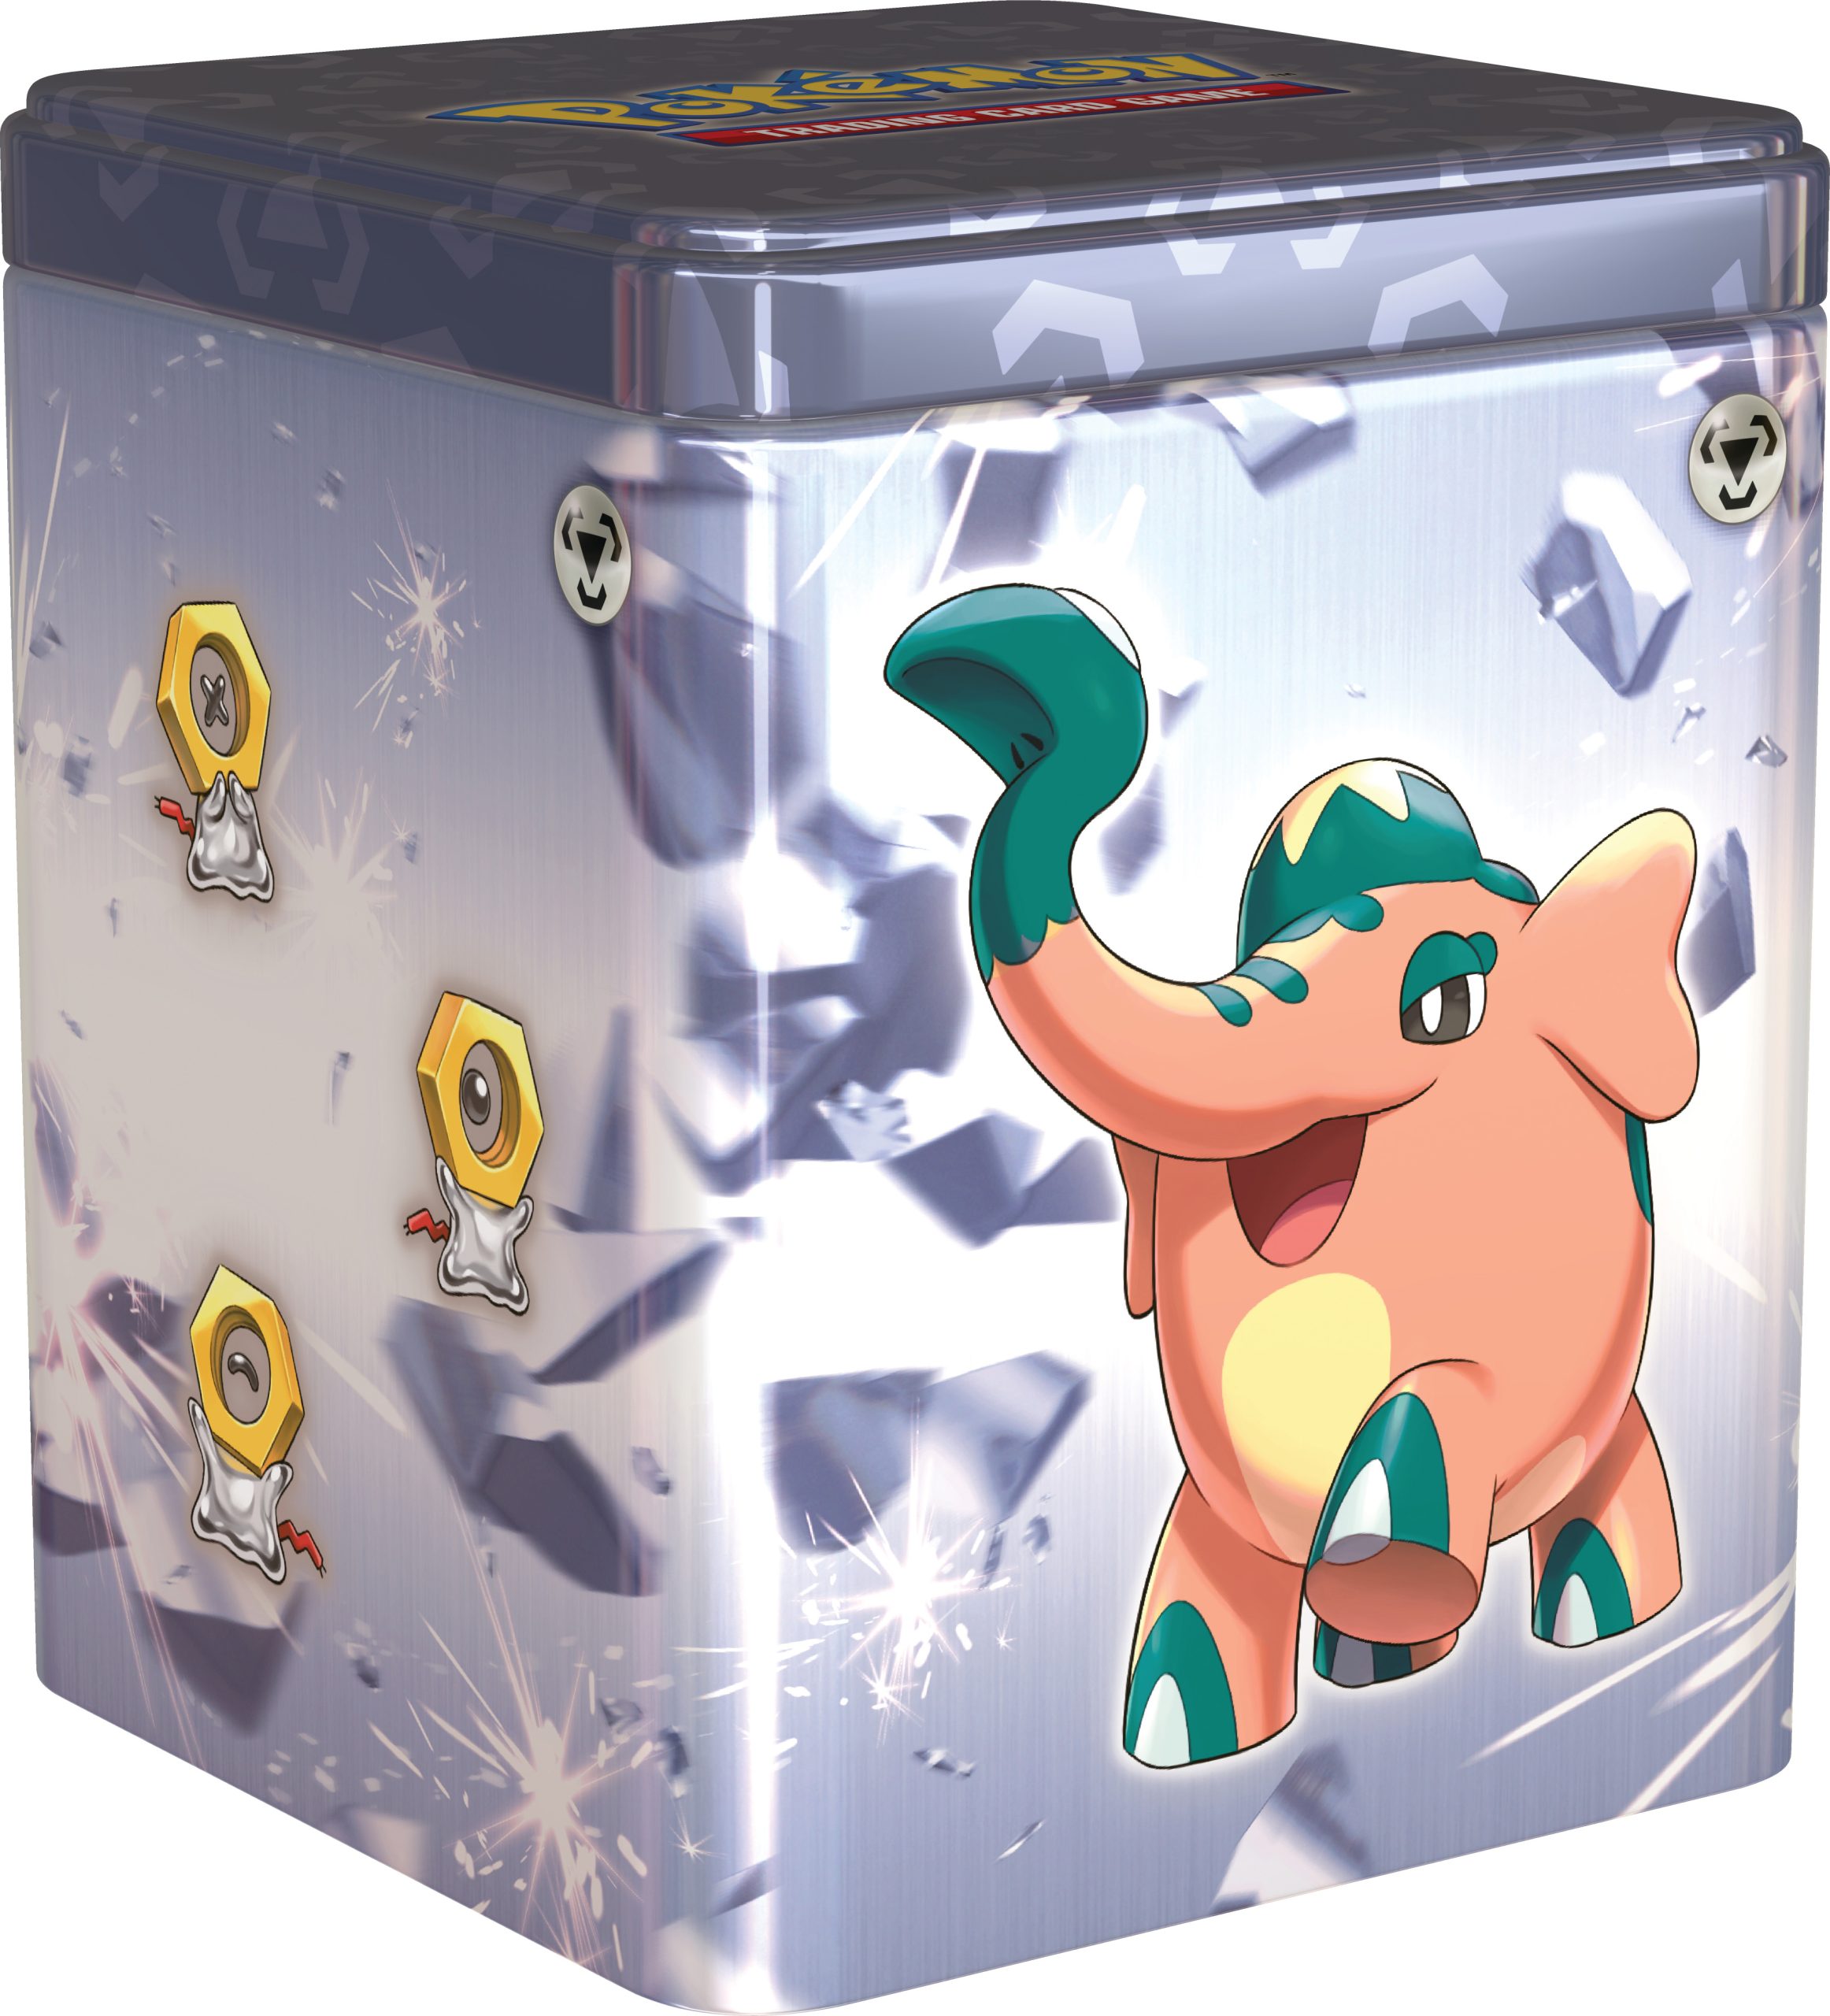 New Stacking Tins Revealed for March Featuring Psychic, Dragon